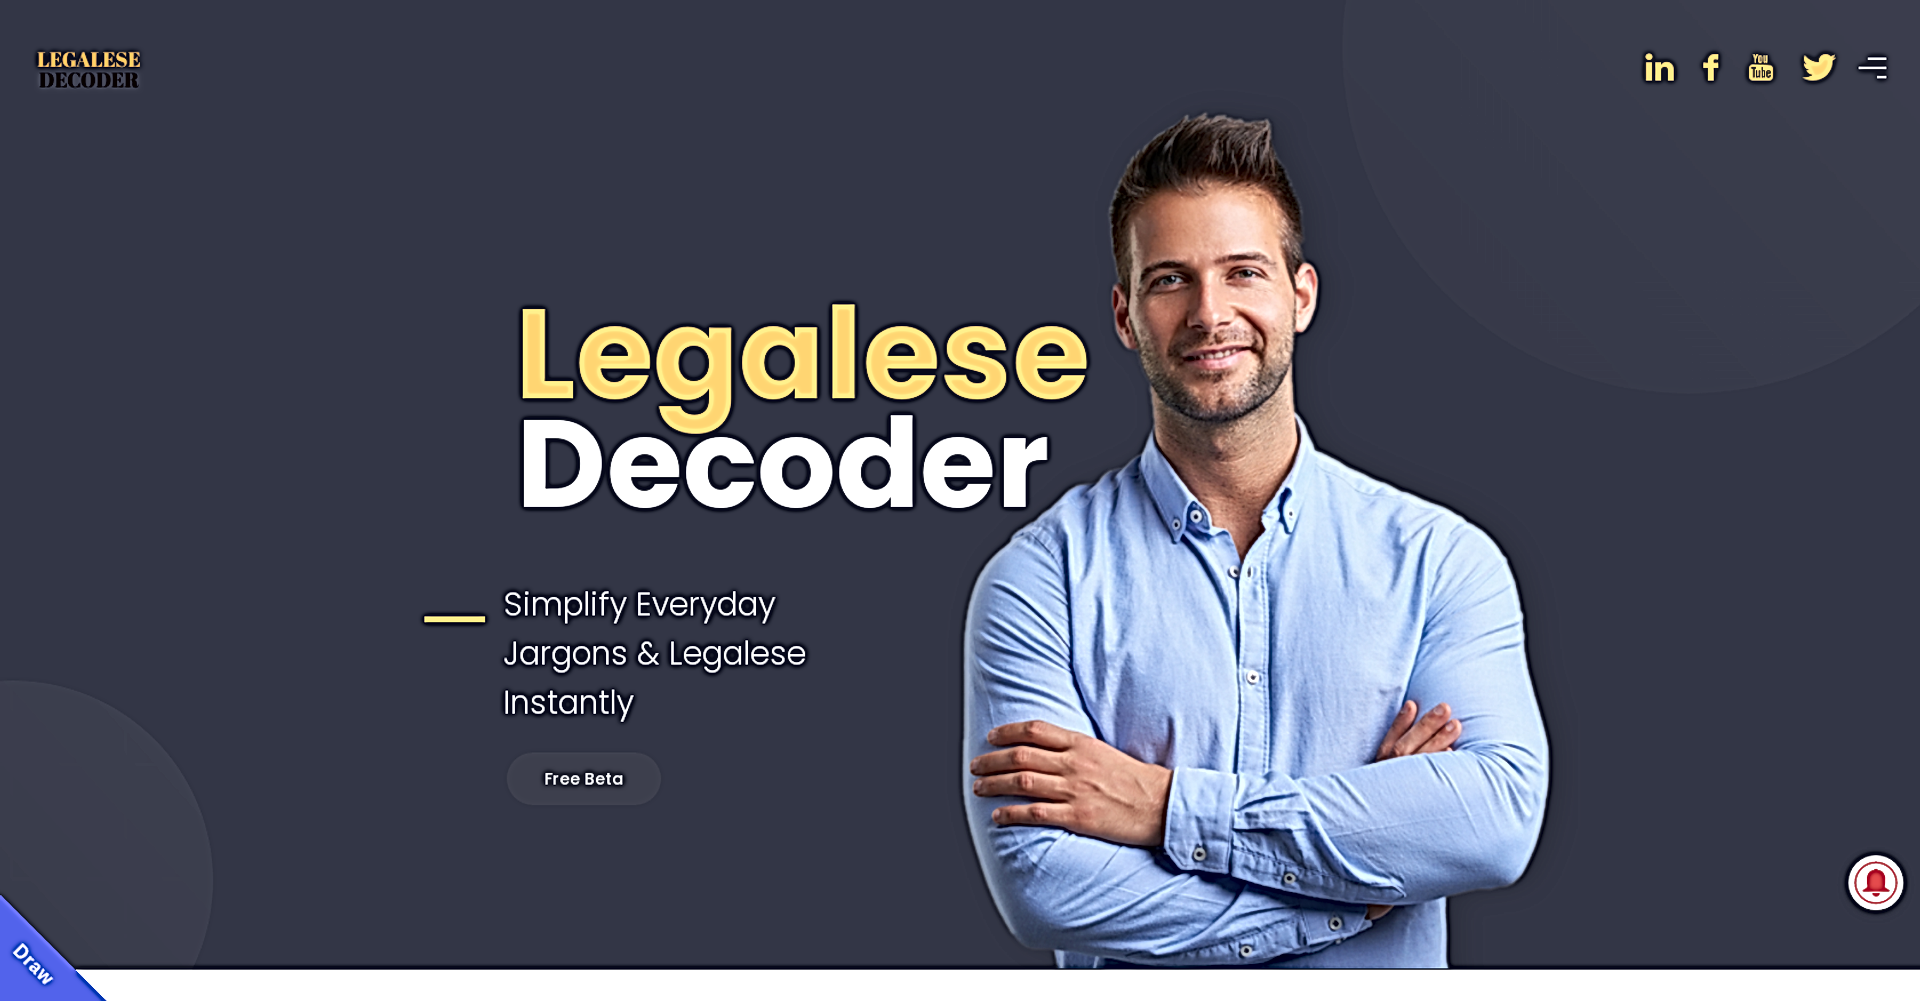 Legalese Decoder featured